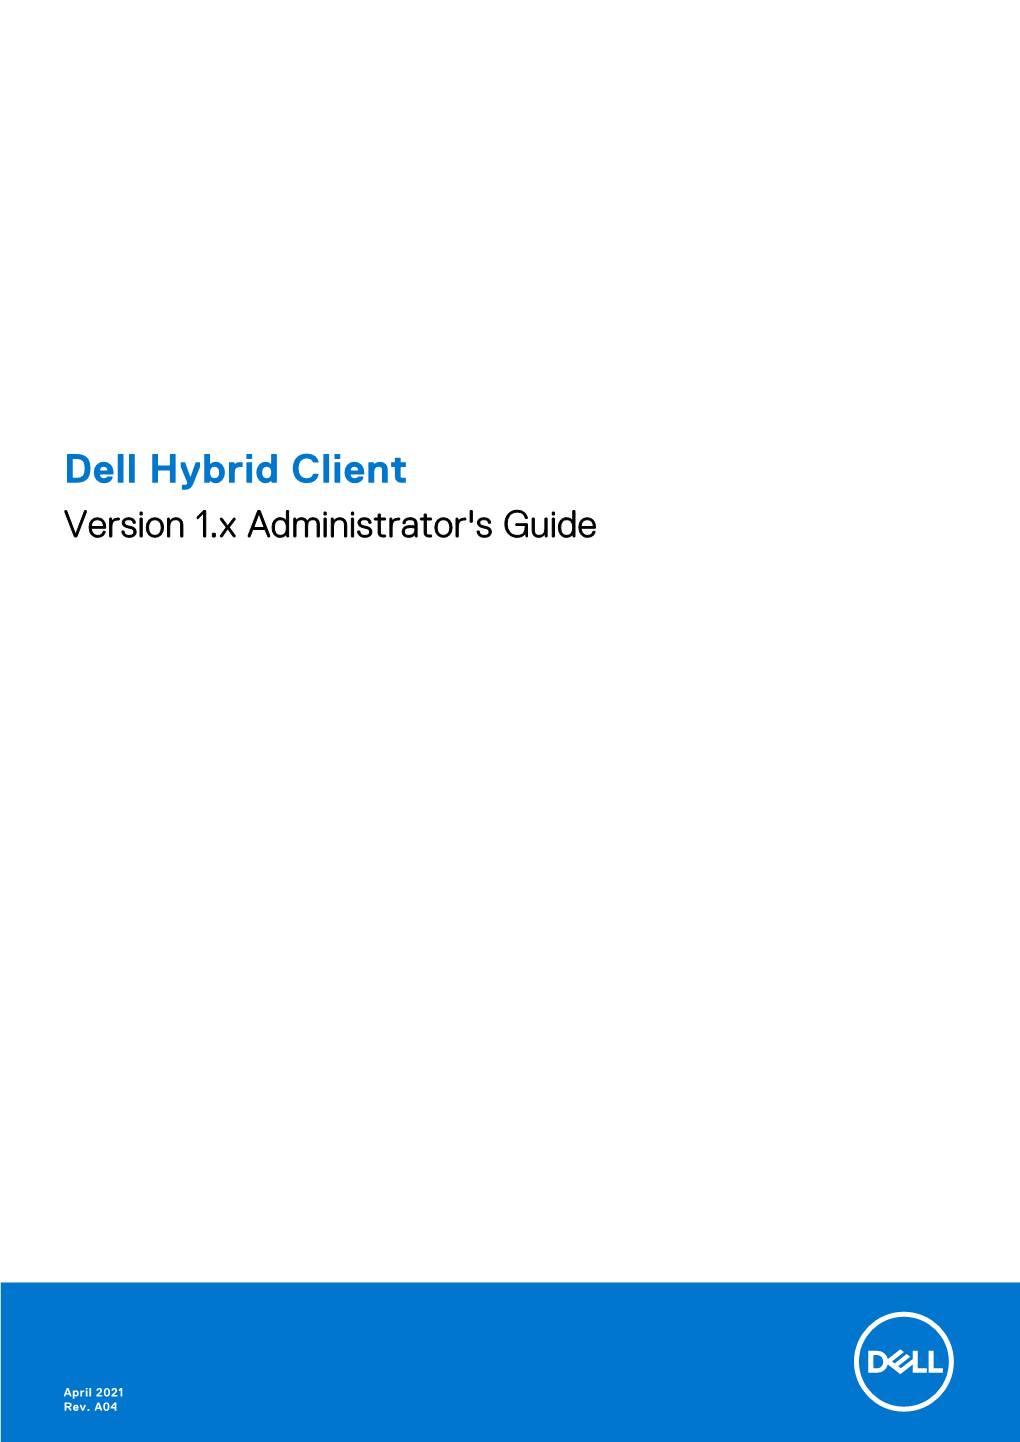 Dell Hybrid Client Version 1.X Administrator's Guide